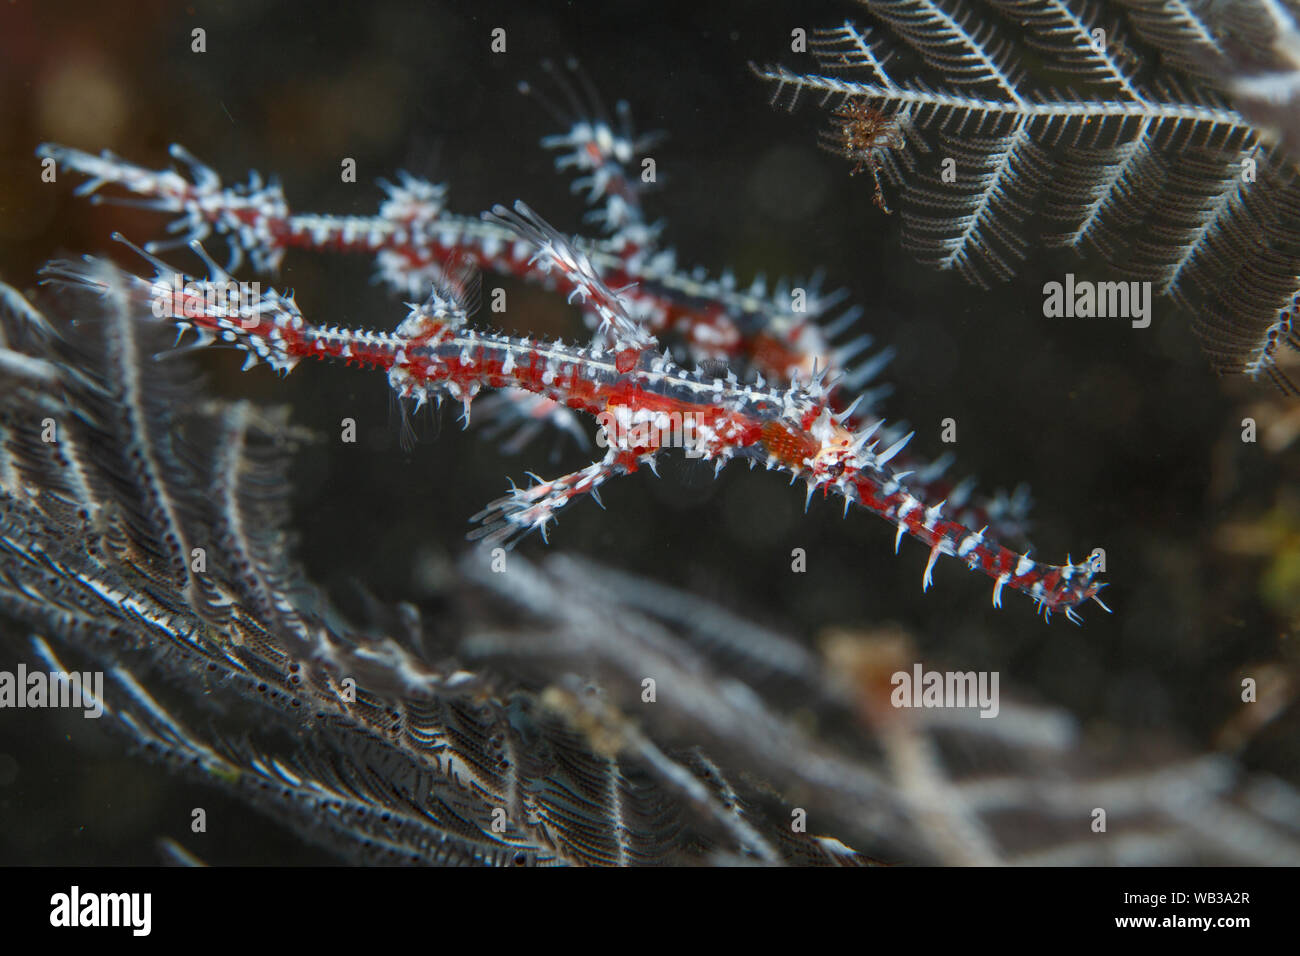 Ornate Ghost Pipefish Pair (Seahorse family) on a Gorgonian, Bali Indonesia Stock Photo